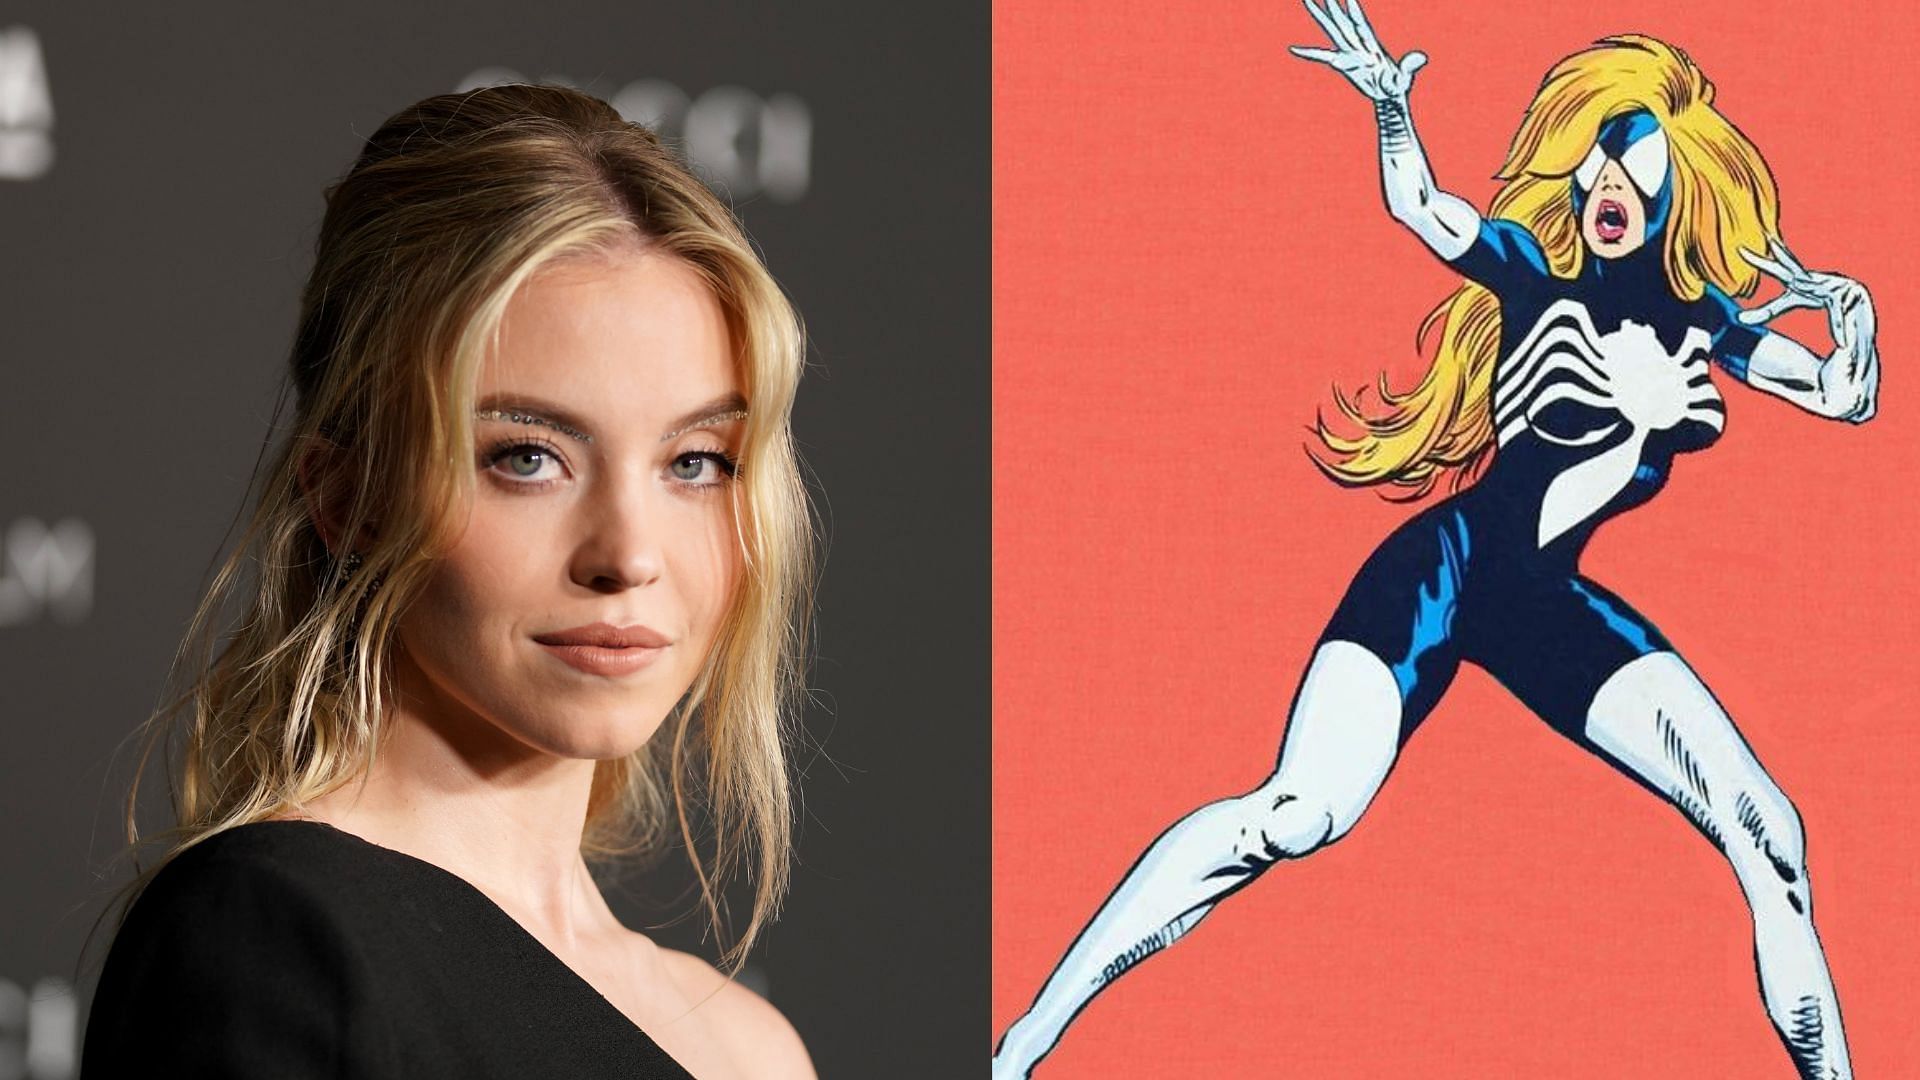 Sydney Sweeney will play the Julia Carpenter version of Spider-Woman (Images via Getty/Marvel)